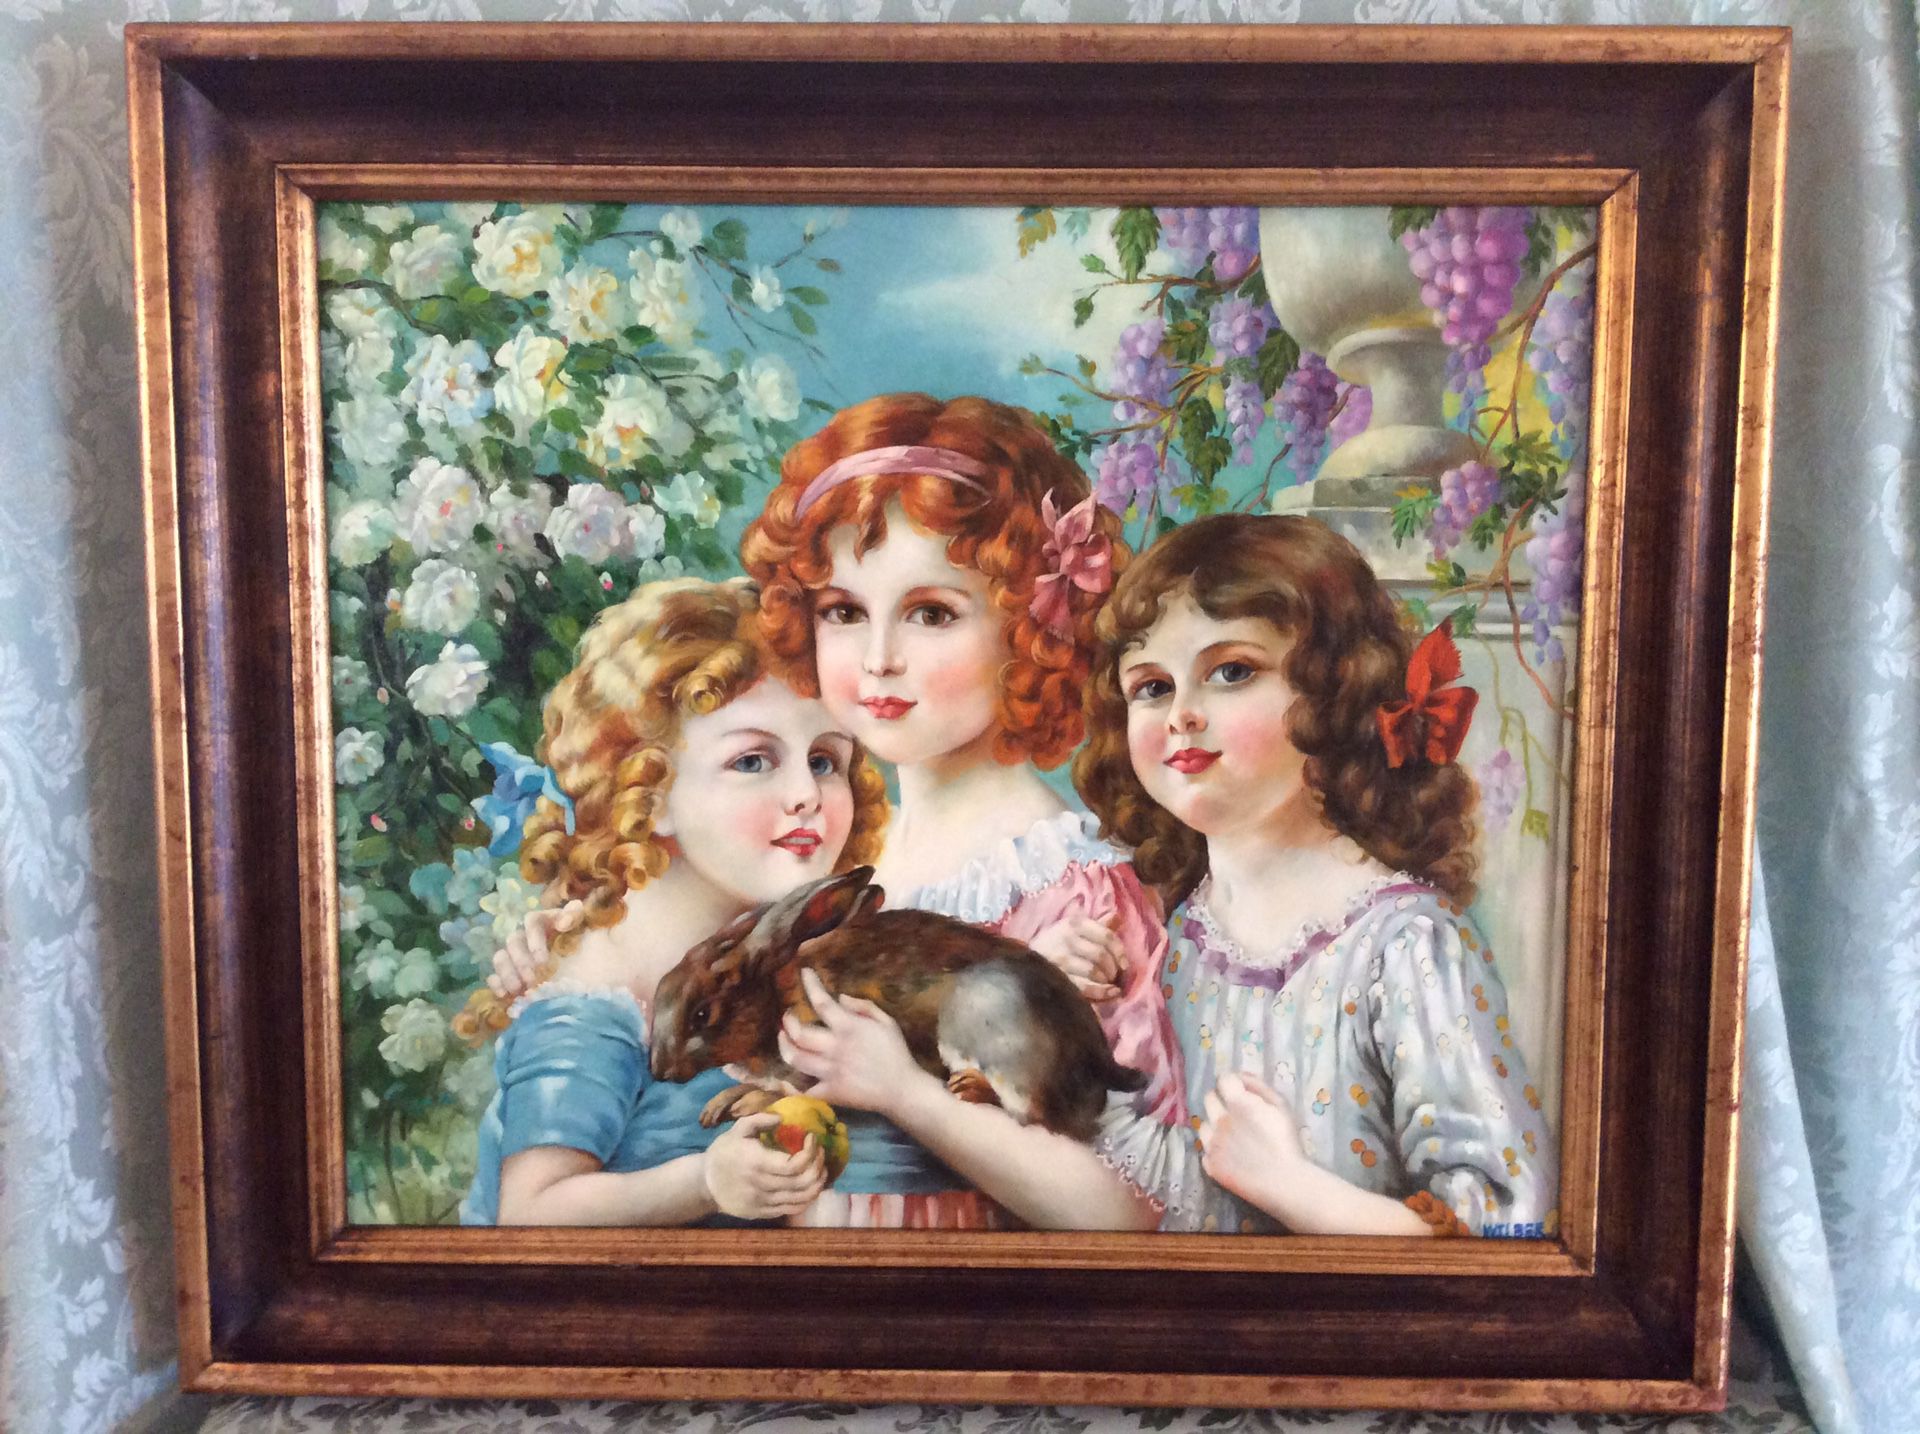 Stunning 3 Girls And Bunny Rabbit Oil Painting Signed